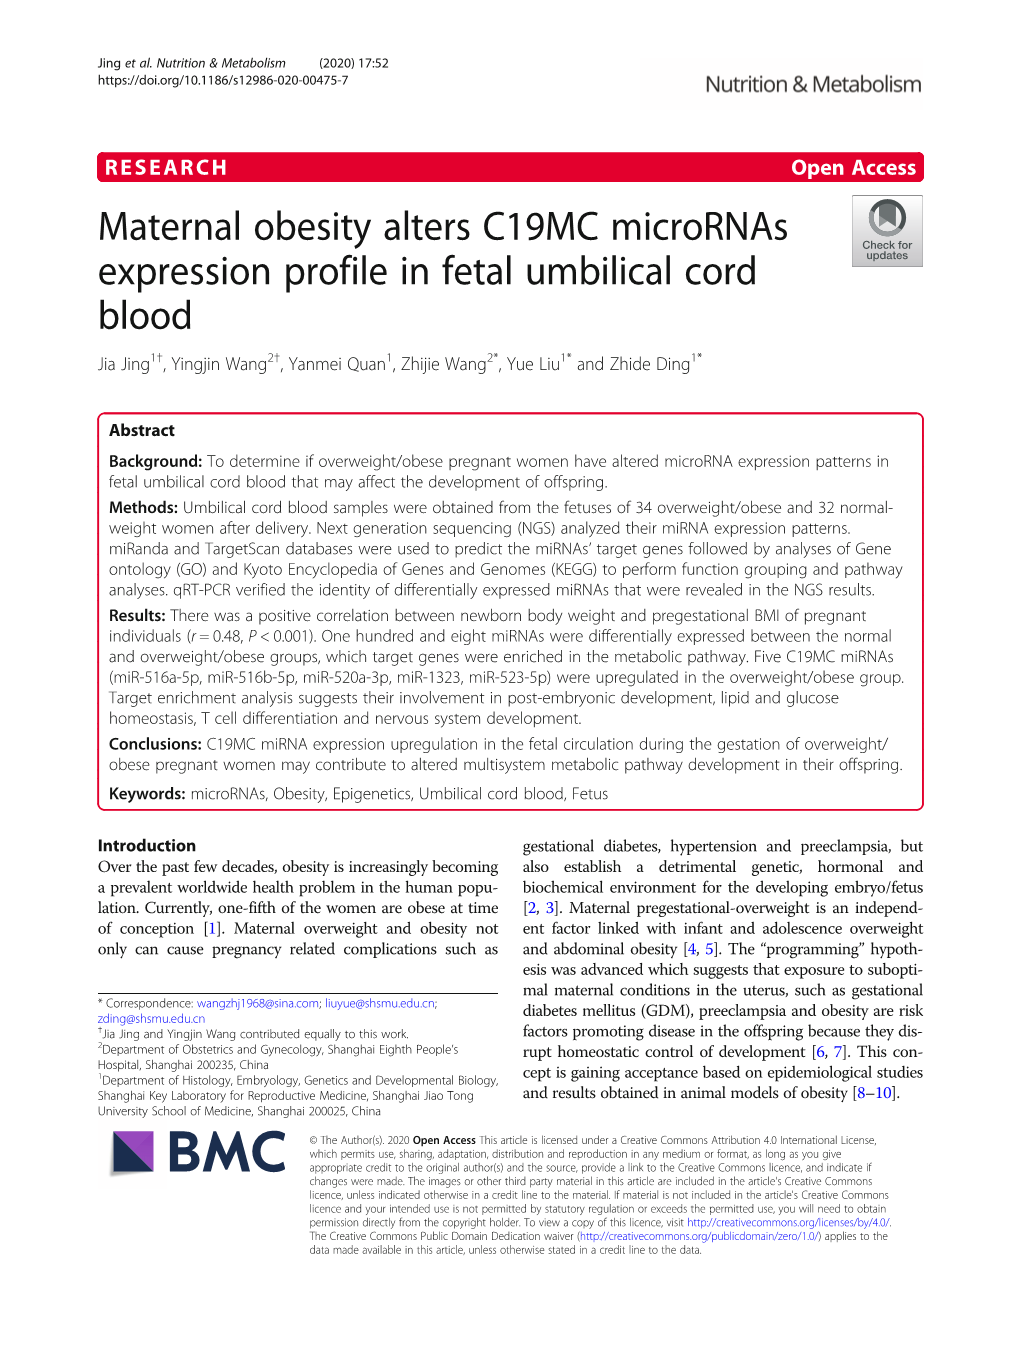 Maternal Obesity Alters C19MC Micrornas Expression Profile In